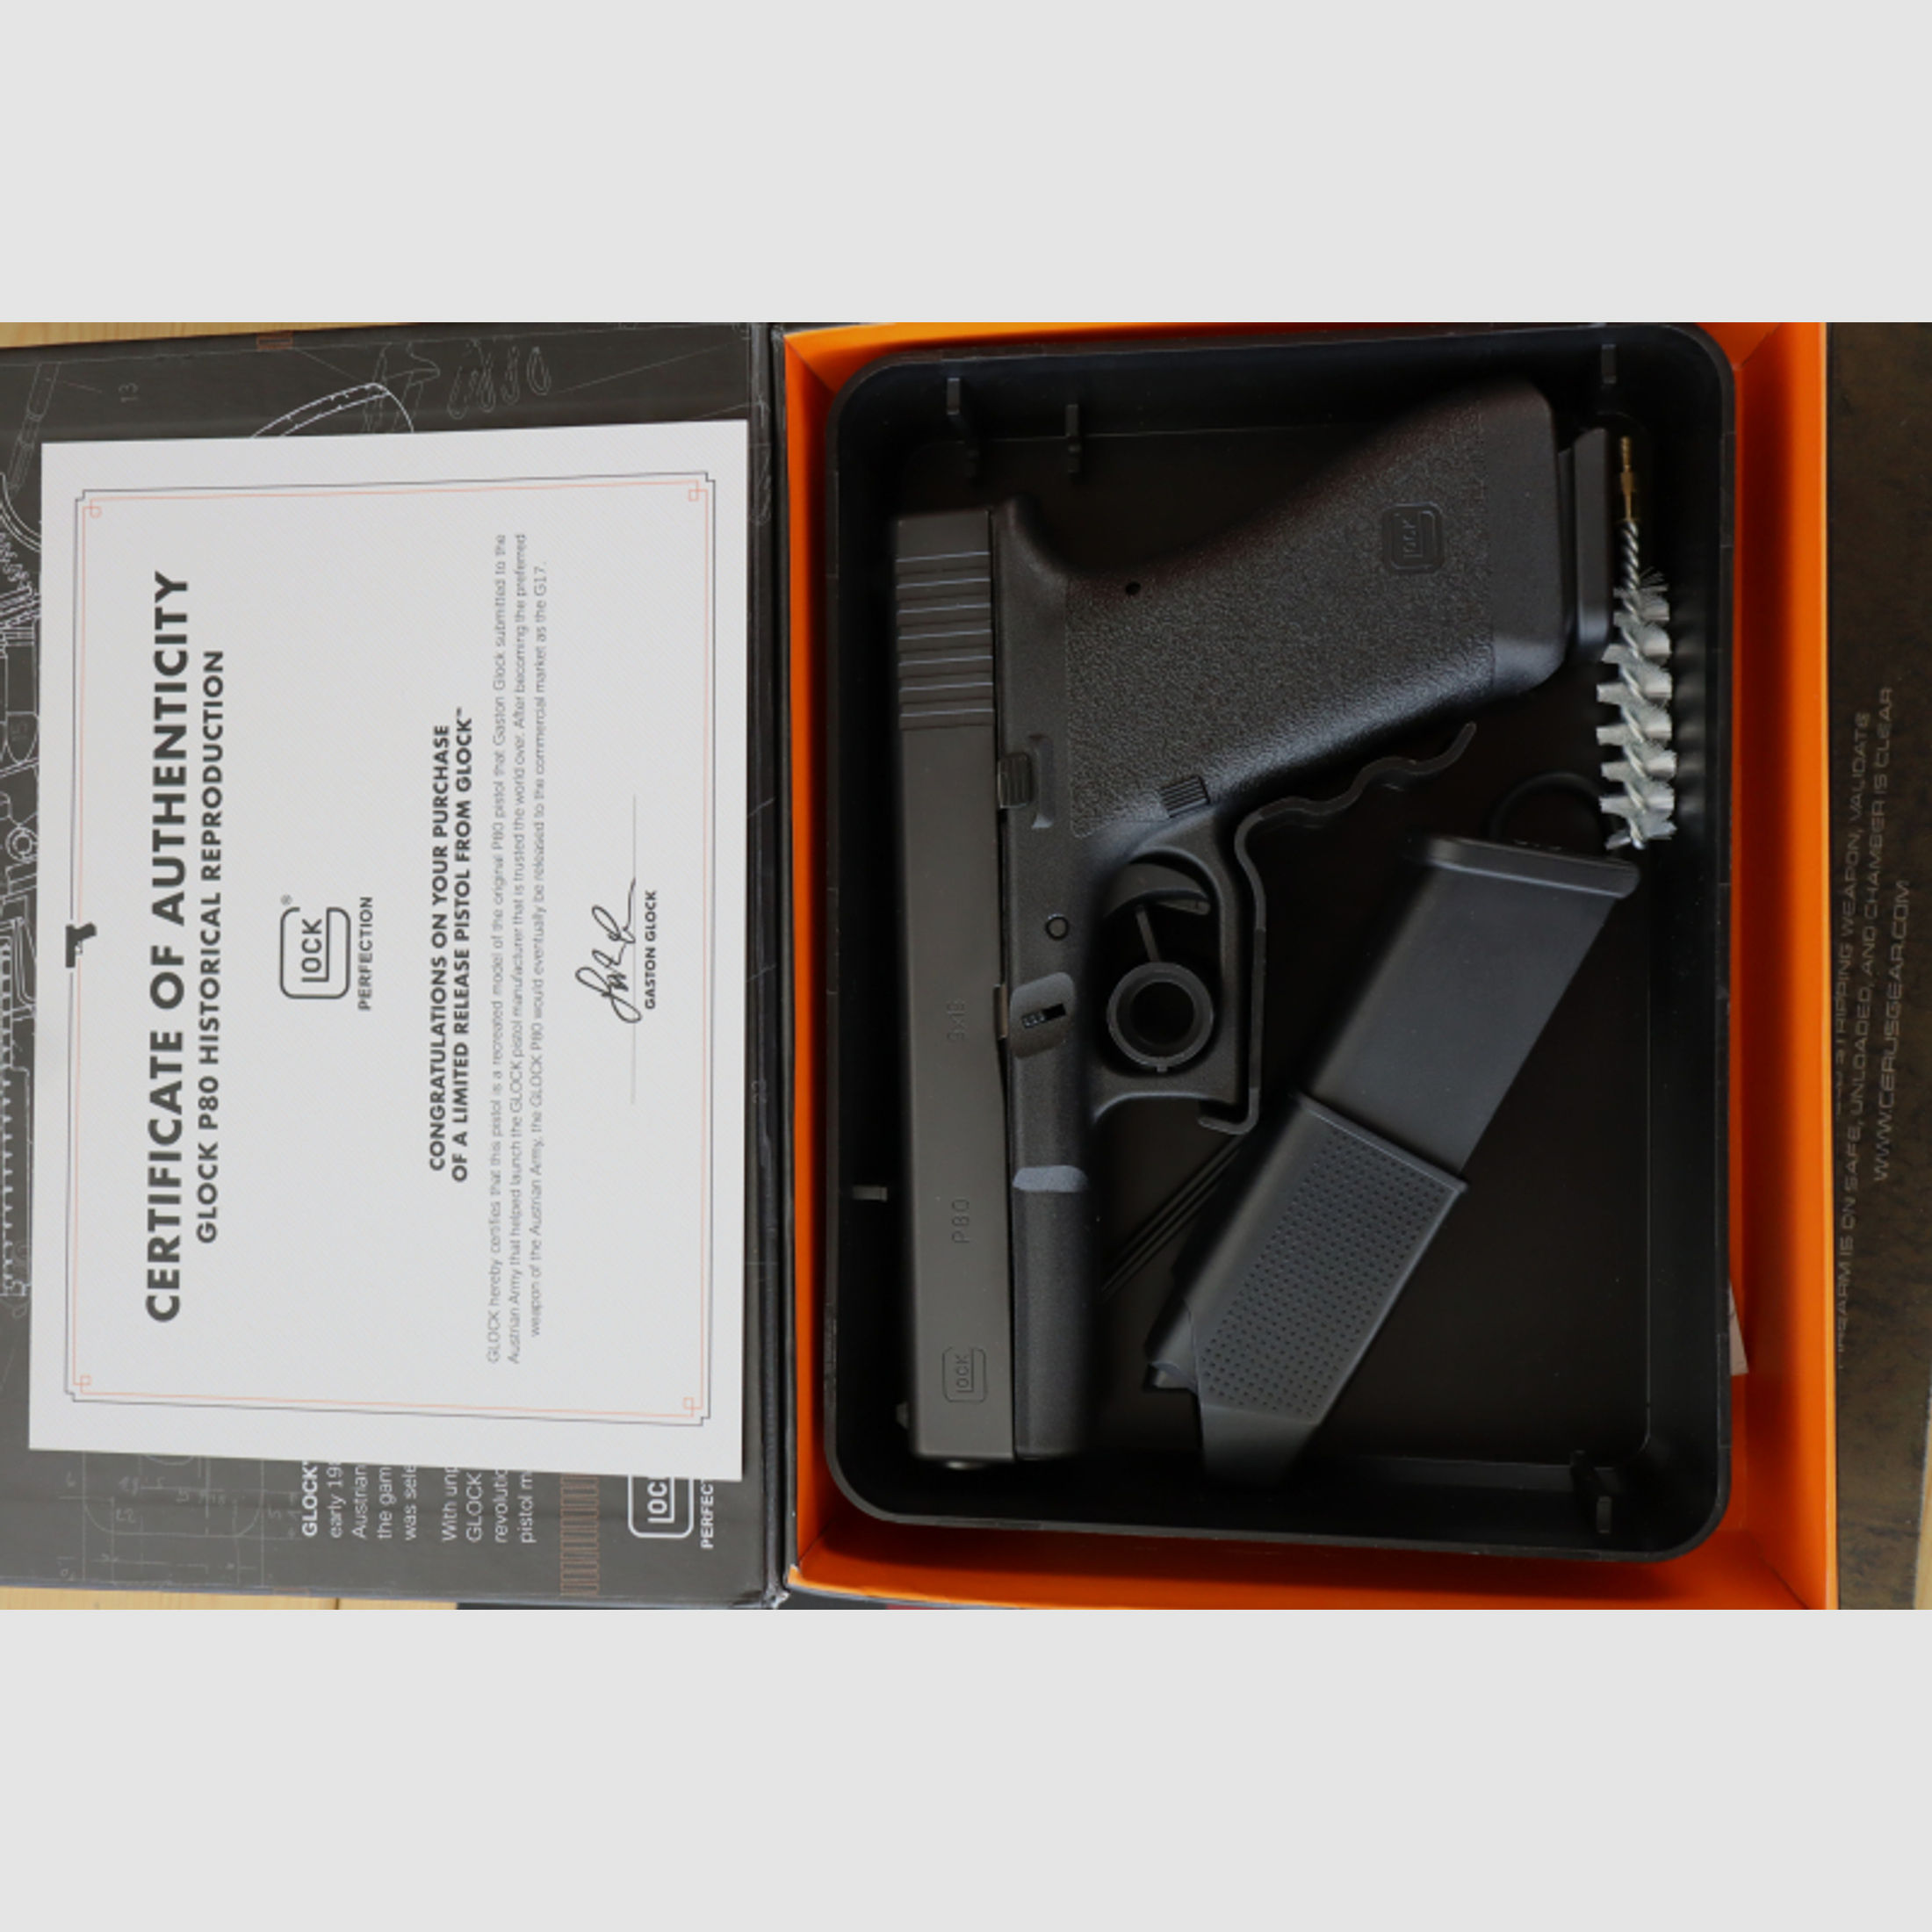 Pistole Glock P80 Special Edition Kaliber 9mm Luger